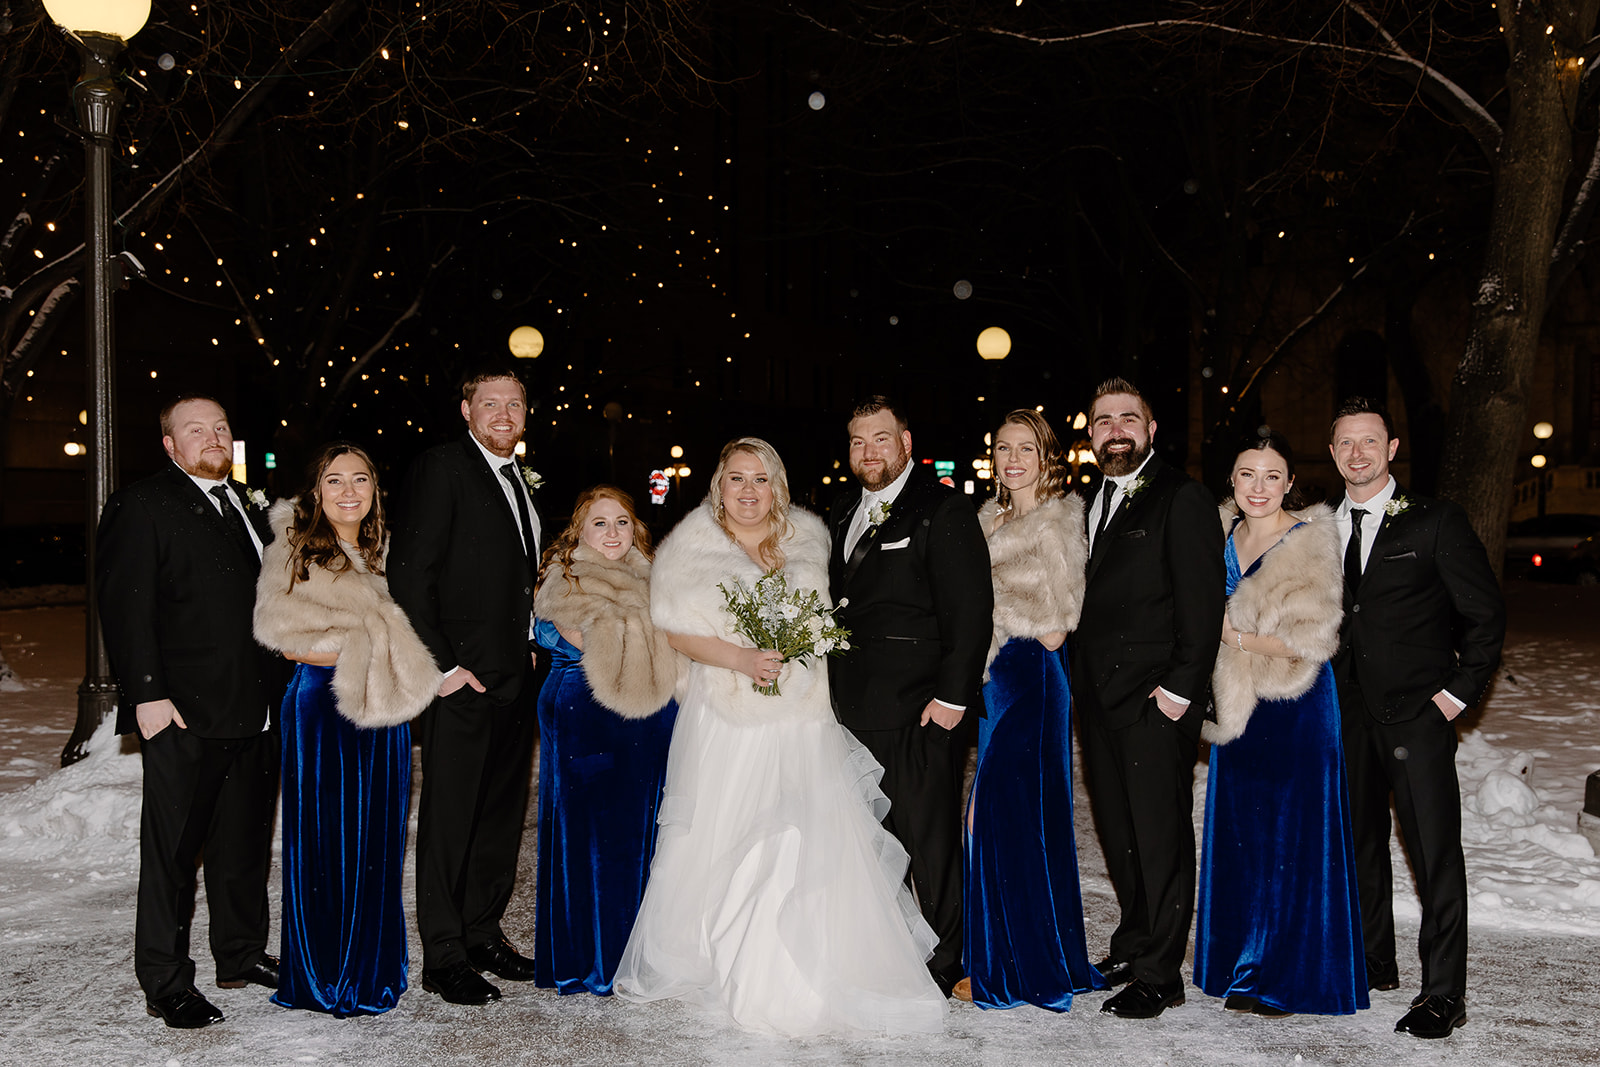 Bride and groom and their wedding party in a snowstorm